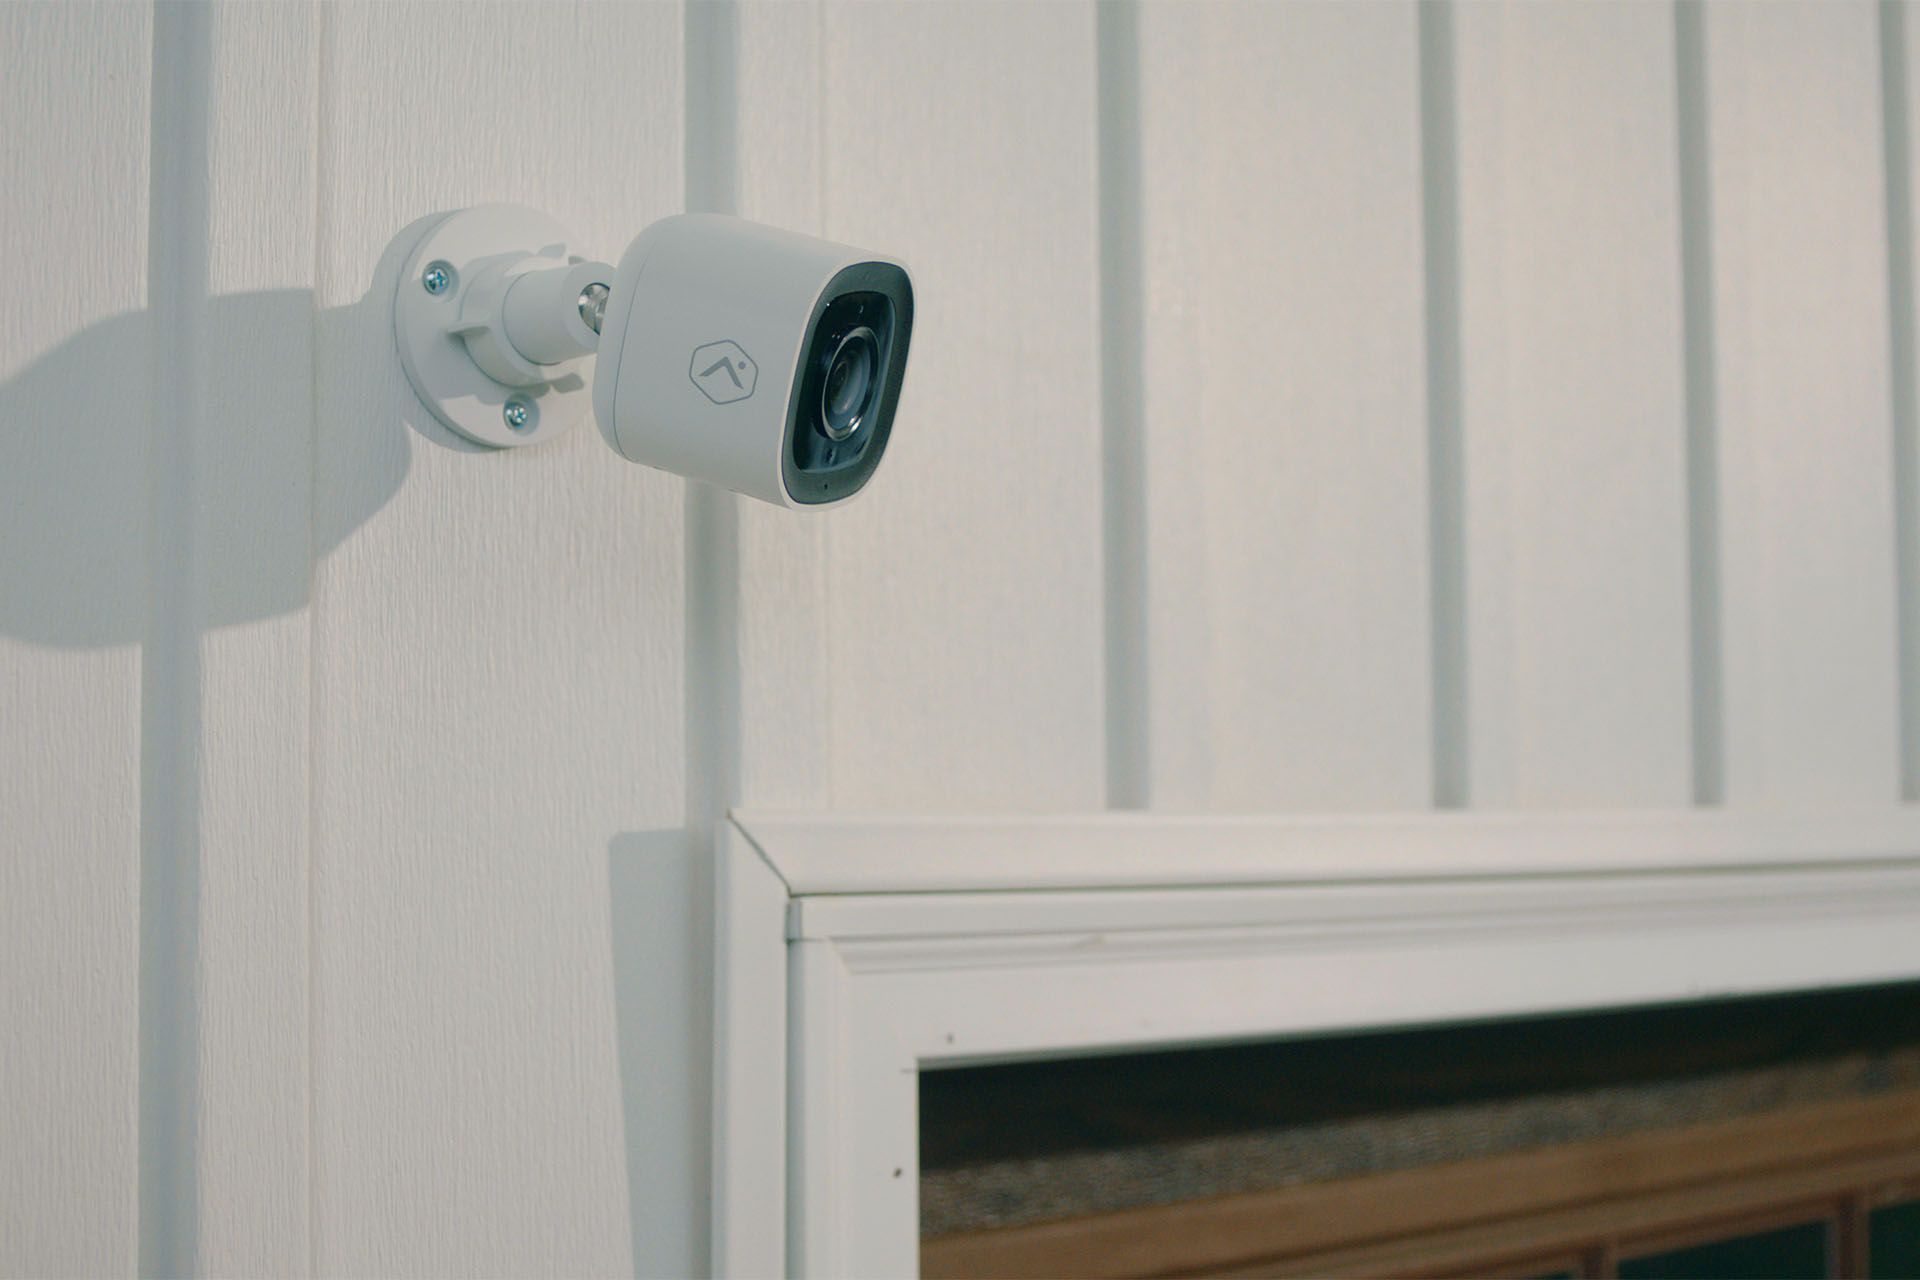 Alarming facts! Four reasons you should consider a home security system